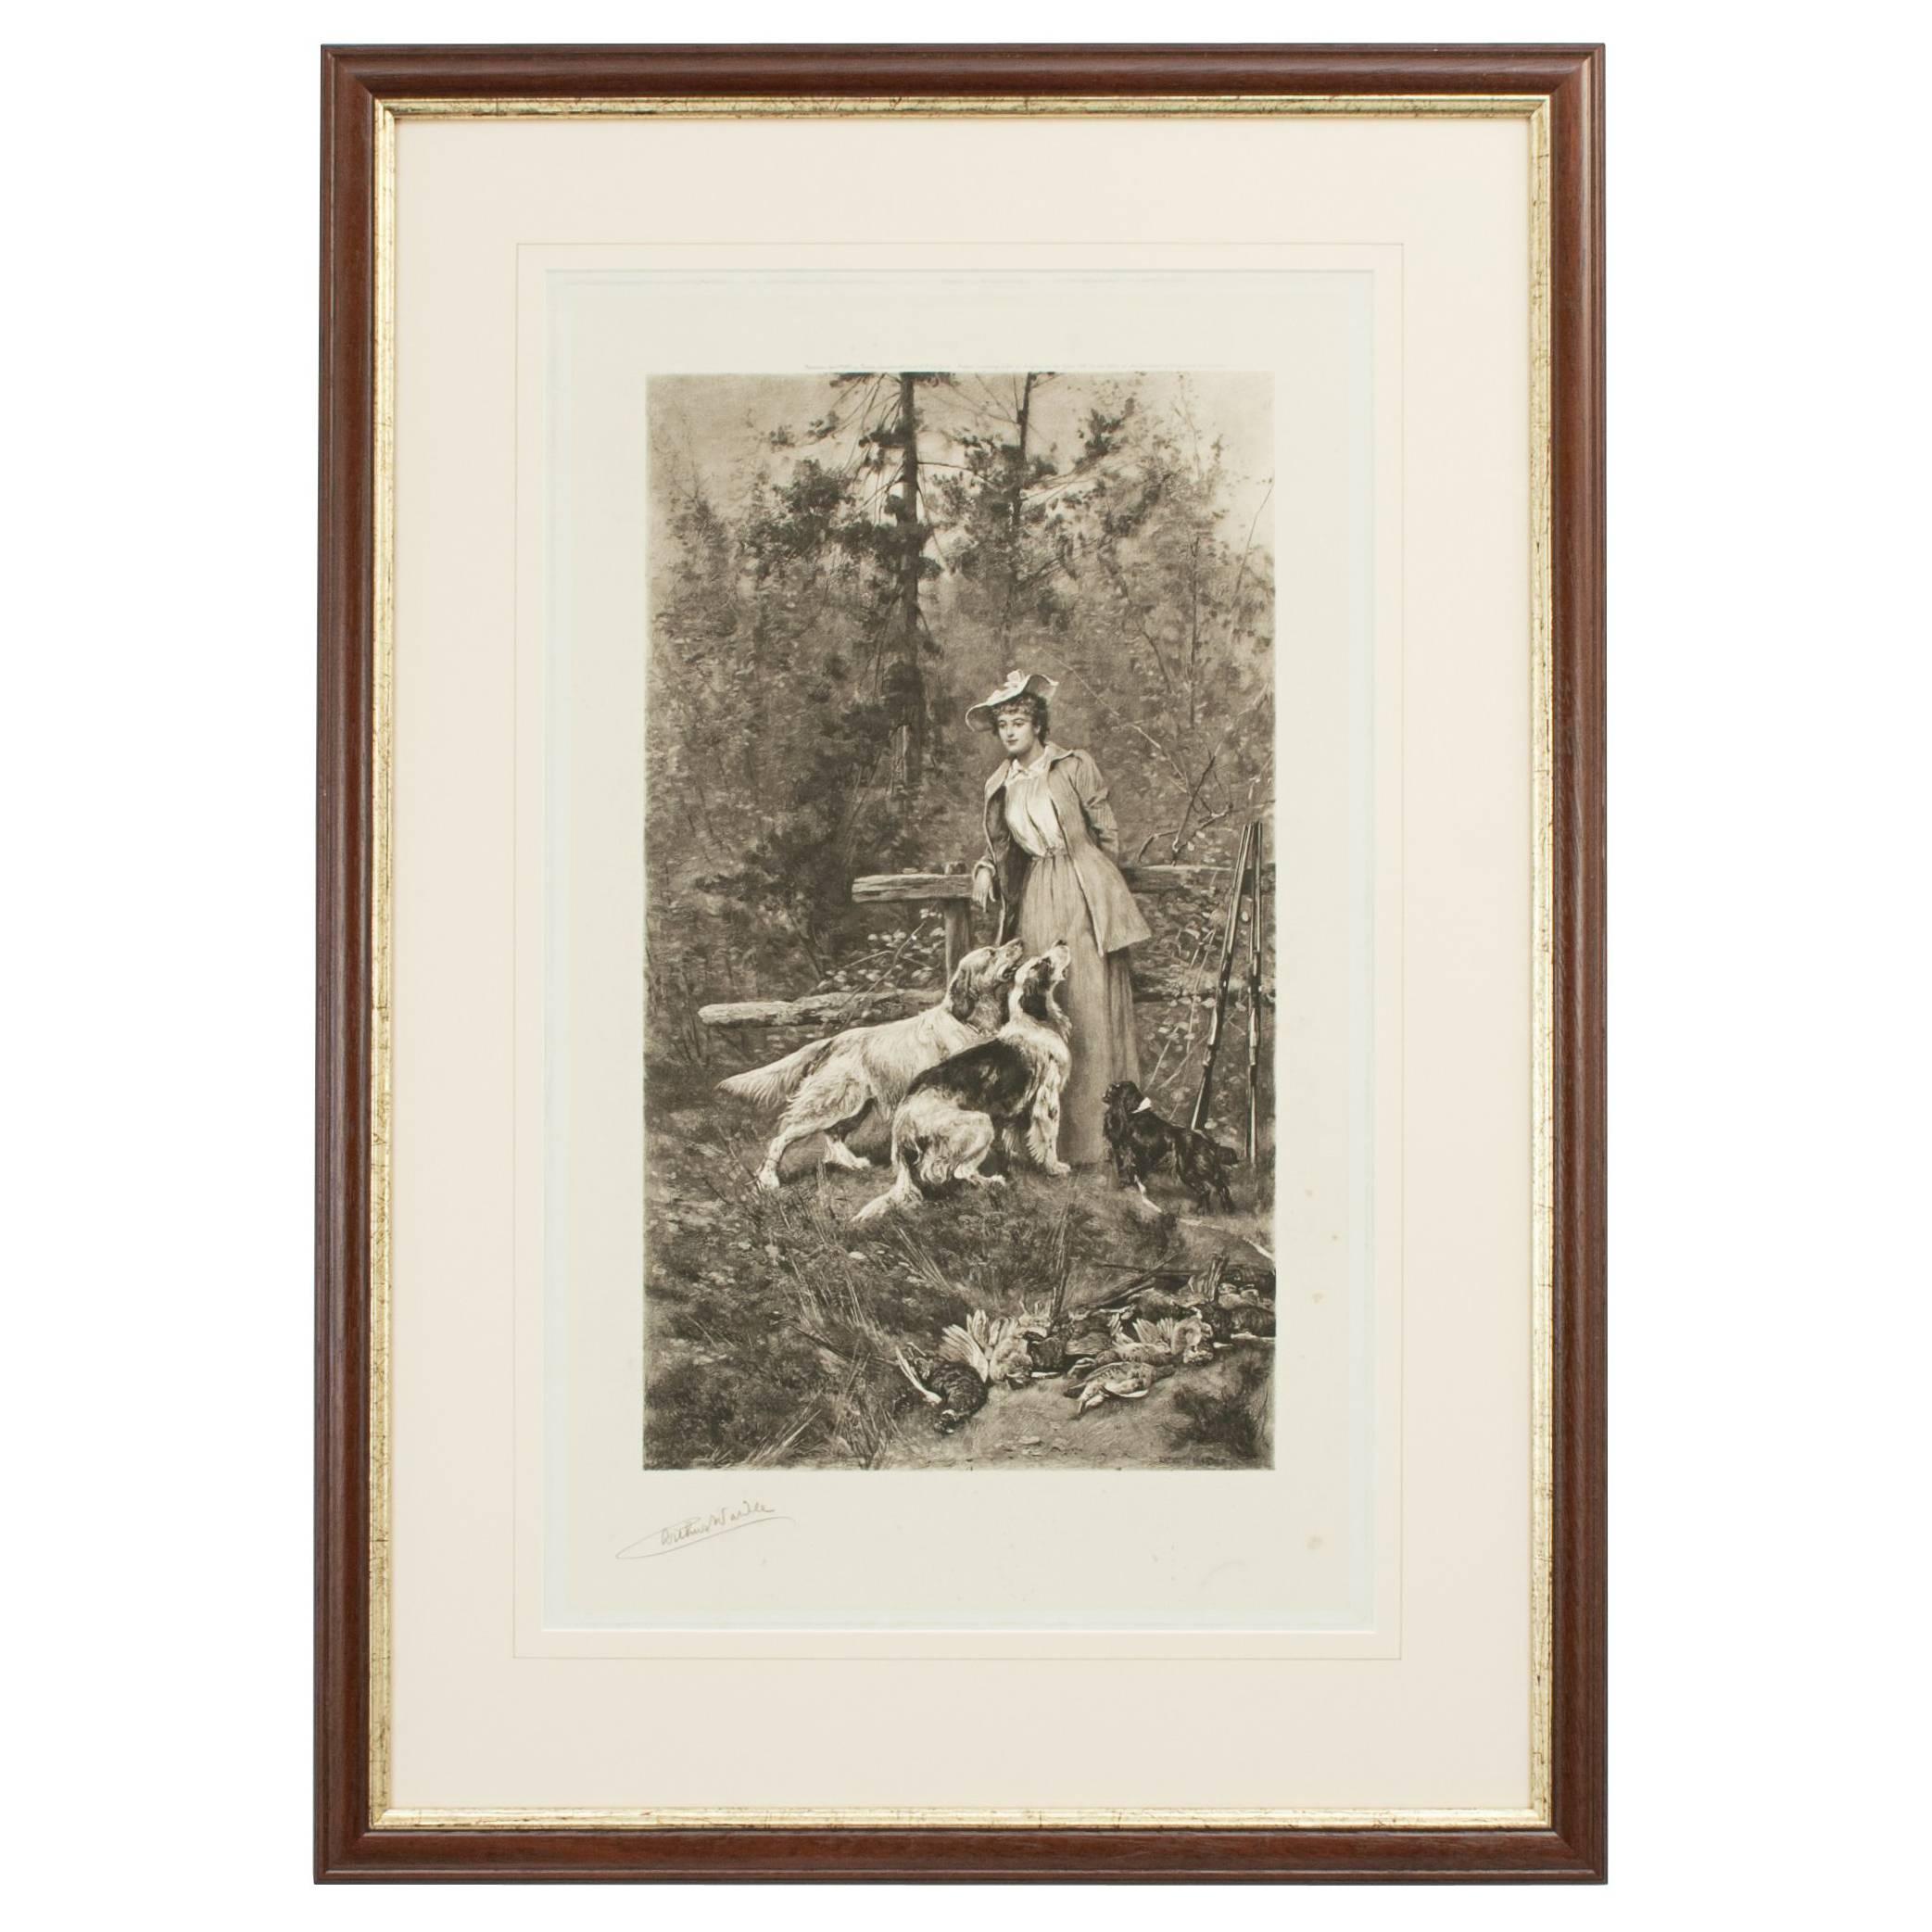 Shooting Print, On the Covert Side, Photogravure by Arthur Wardle